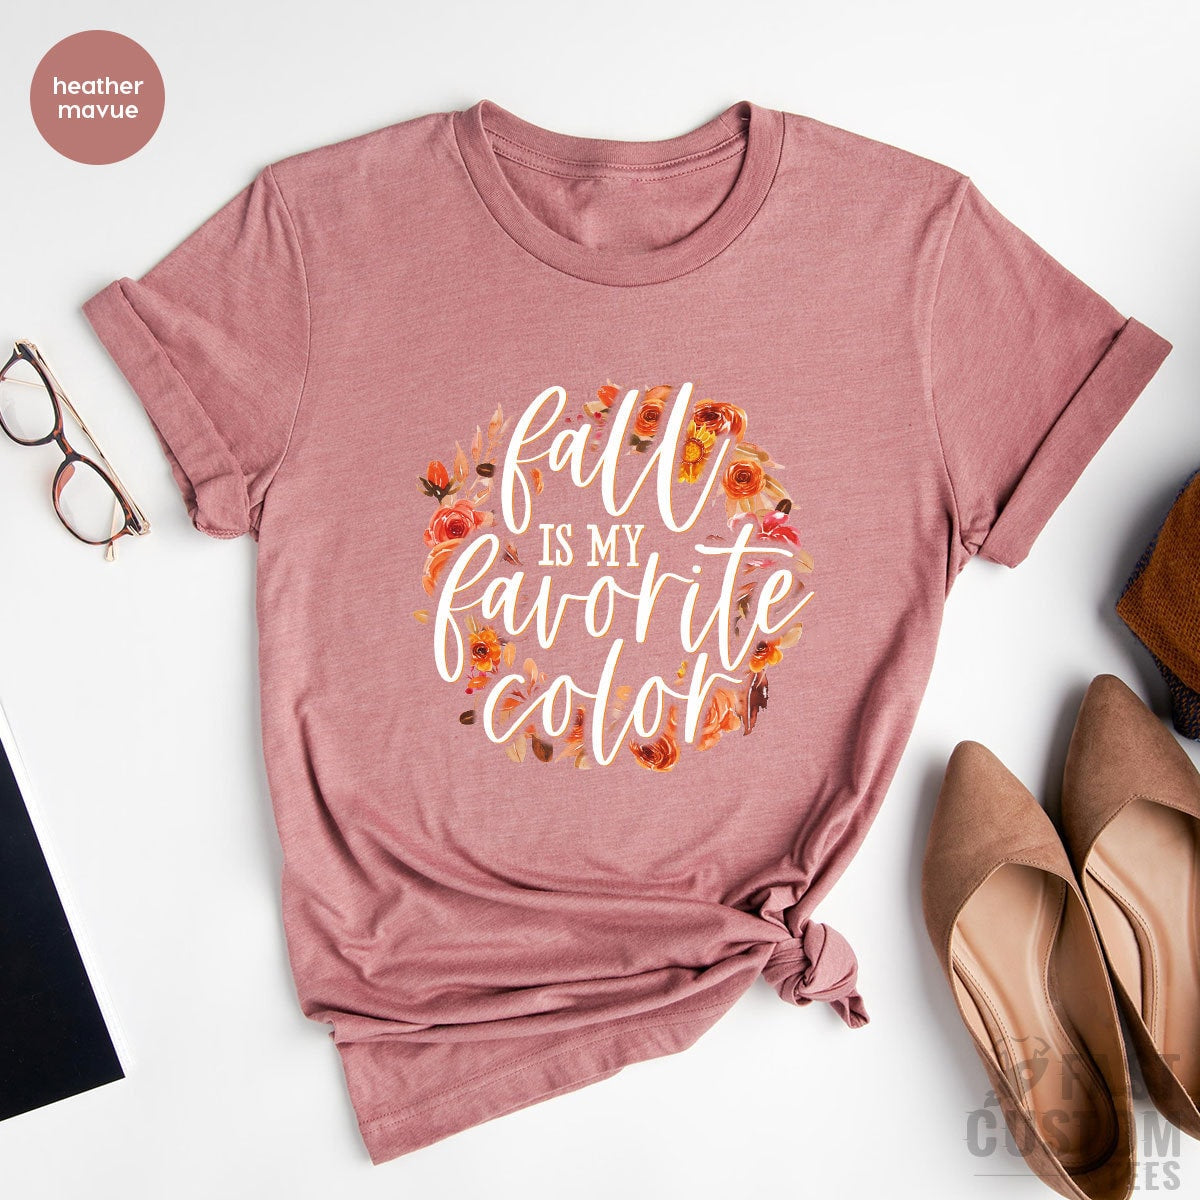 Fall Is My Favorite Color Shirt, Fall Shirt, Halloween Shirt, Autumn Shirt, Gift For Women, Floral Shirt, Shirts With Sayings - Fastdeliverytees.com